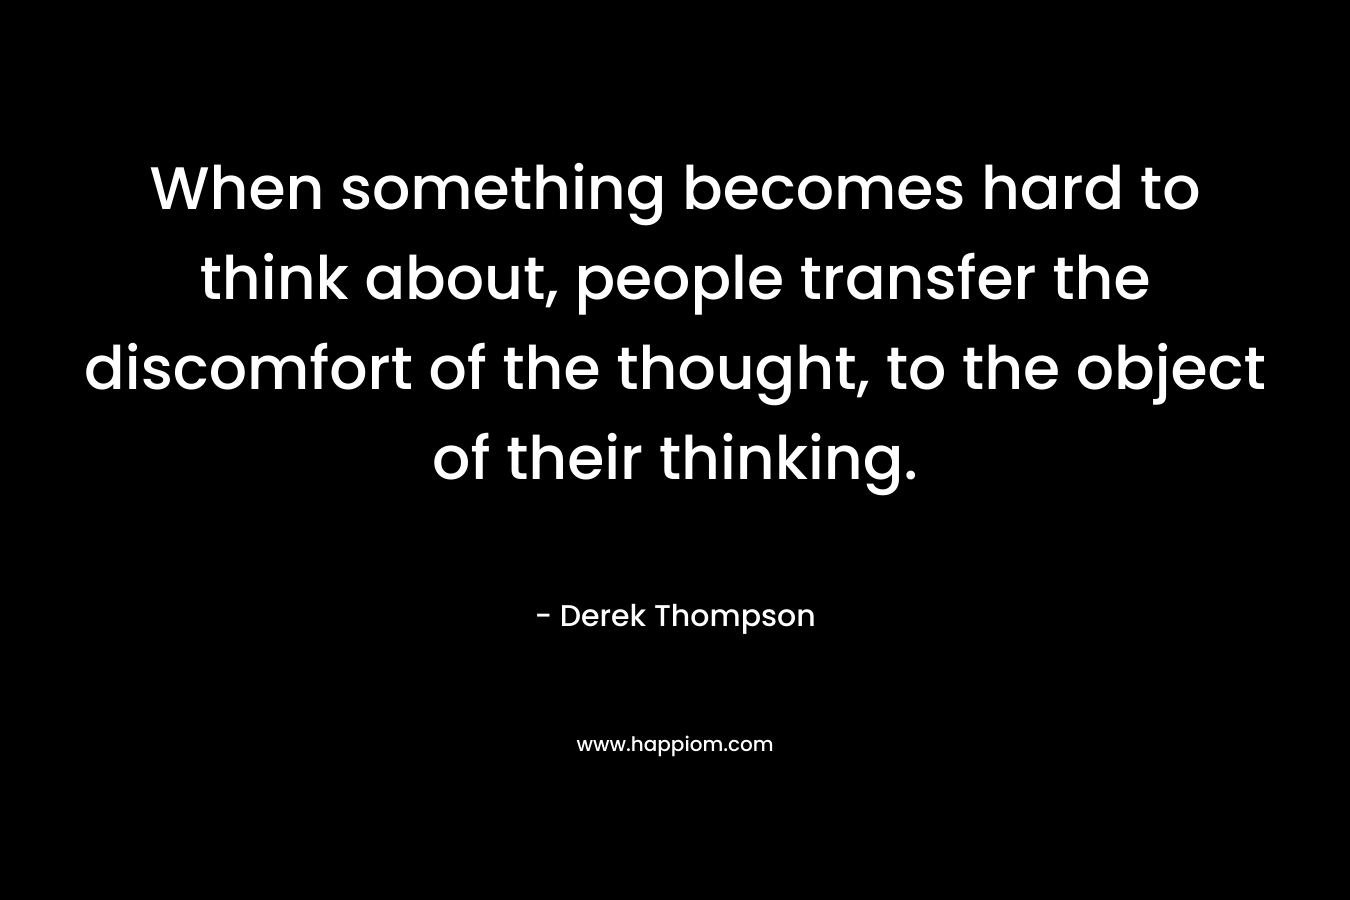 When something becomes hard to think about, people transfer the discomfort of the thought, to the object of their thinking.